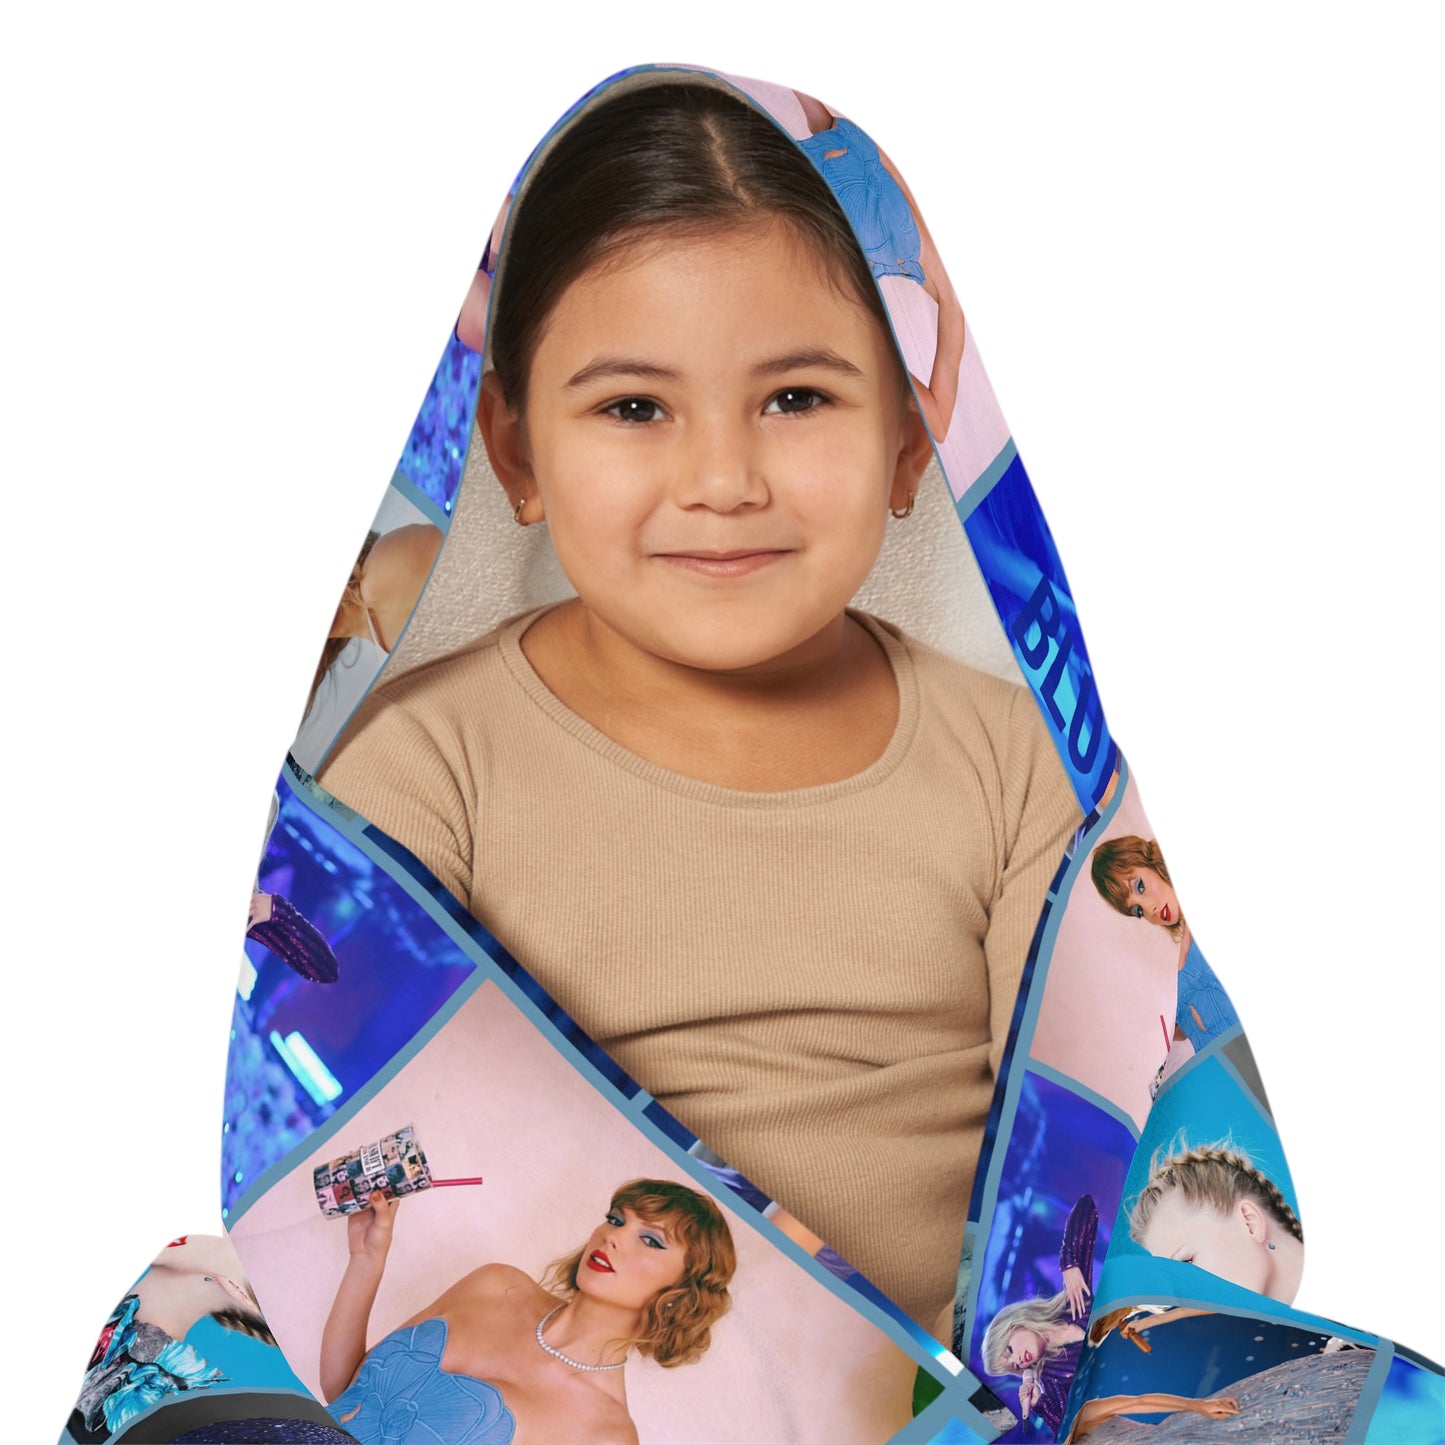 Taylor Swift Blue Aesthetic Collage Youth Hooded Towel